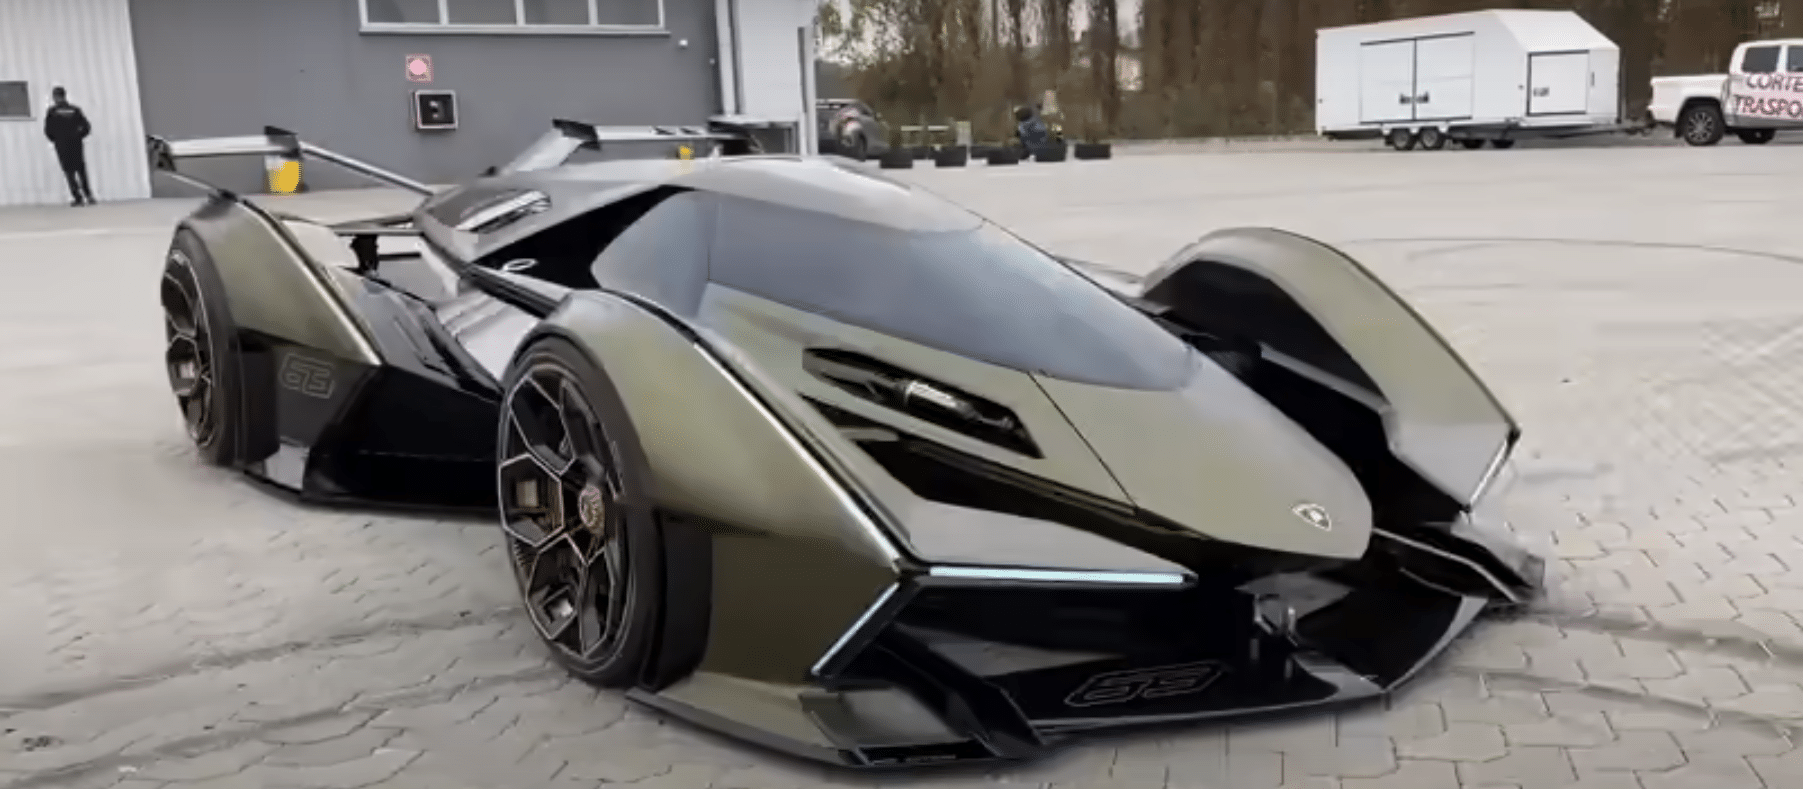 is-this-the-worlds-most-insane-car-a-look-at-the-lamborghini-vision-gran-turismo